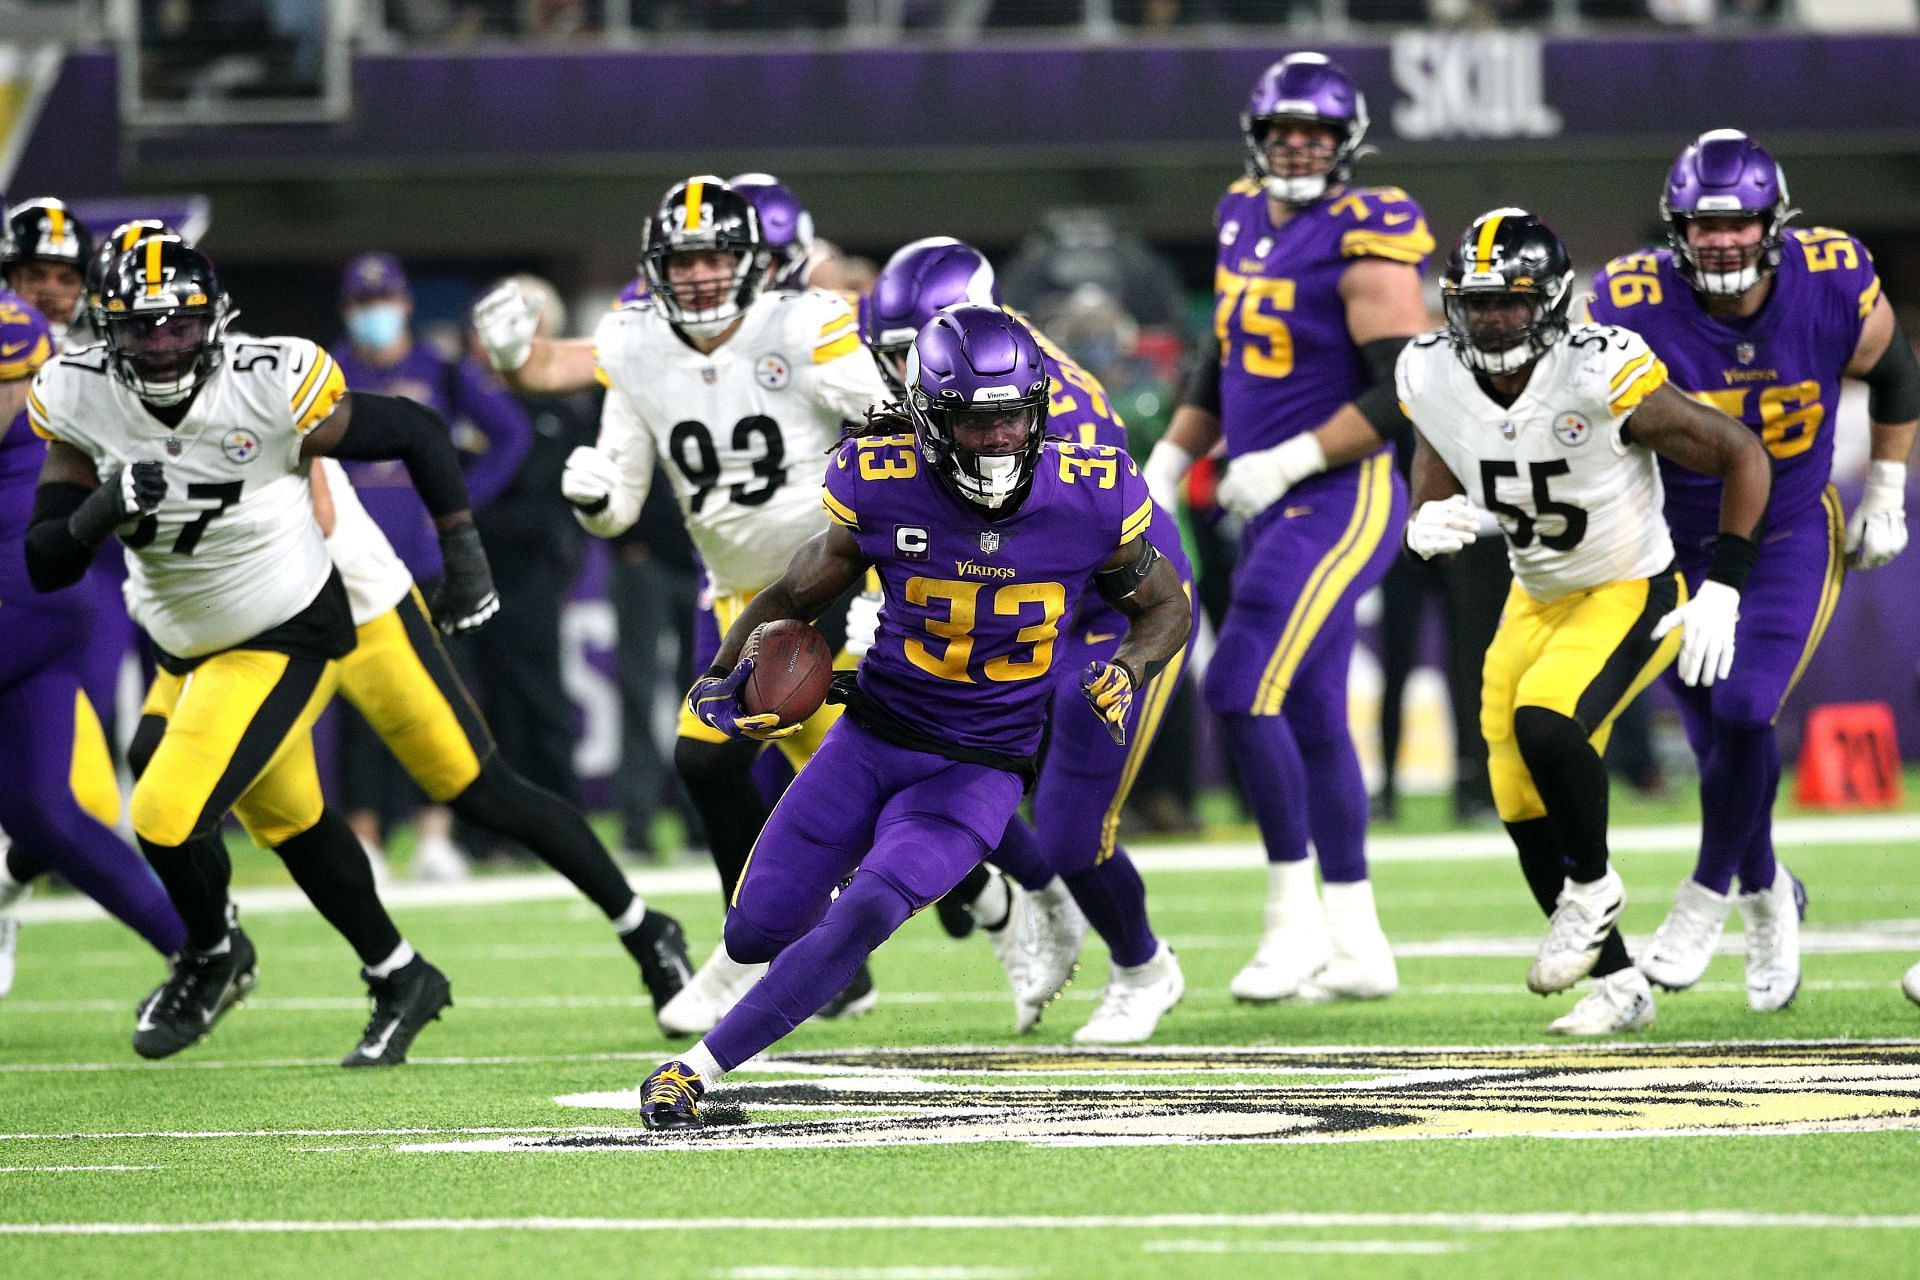 Dalvin Cook in action during an NFL match